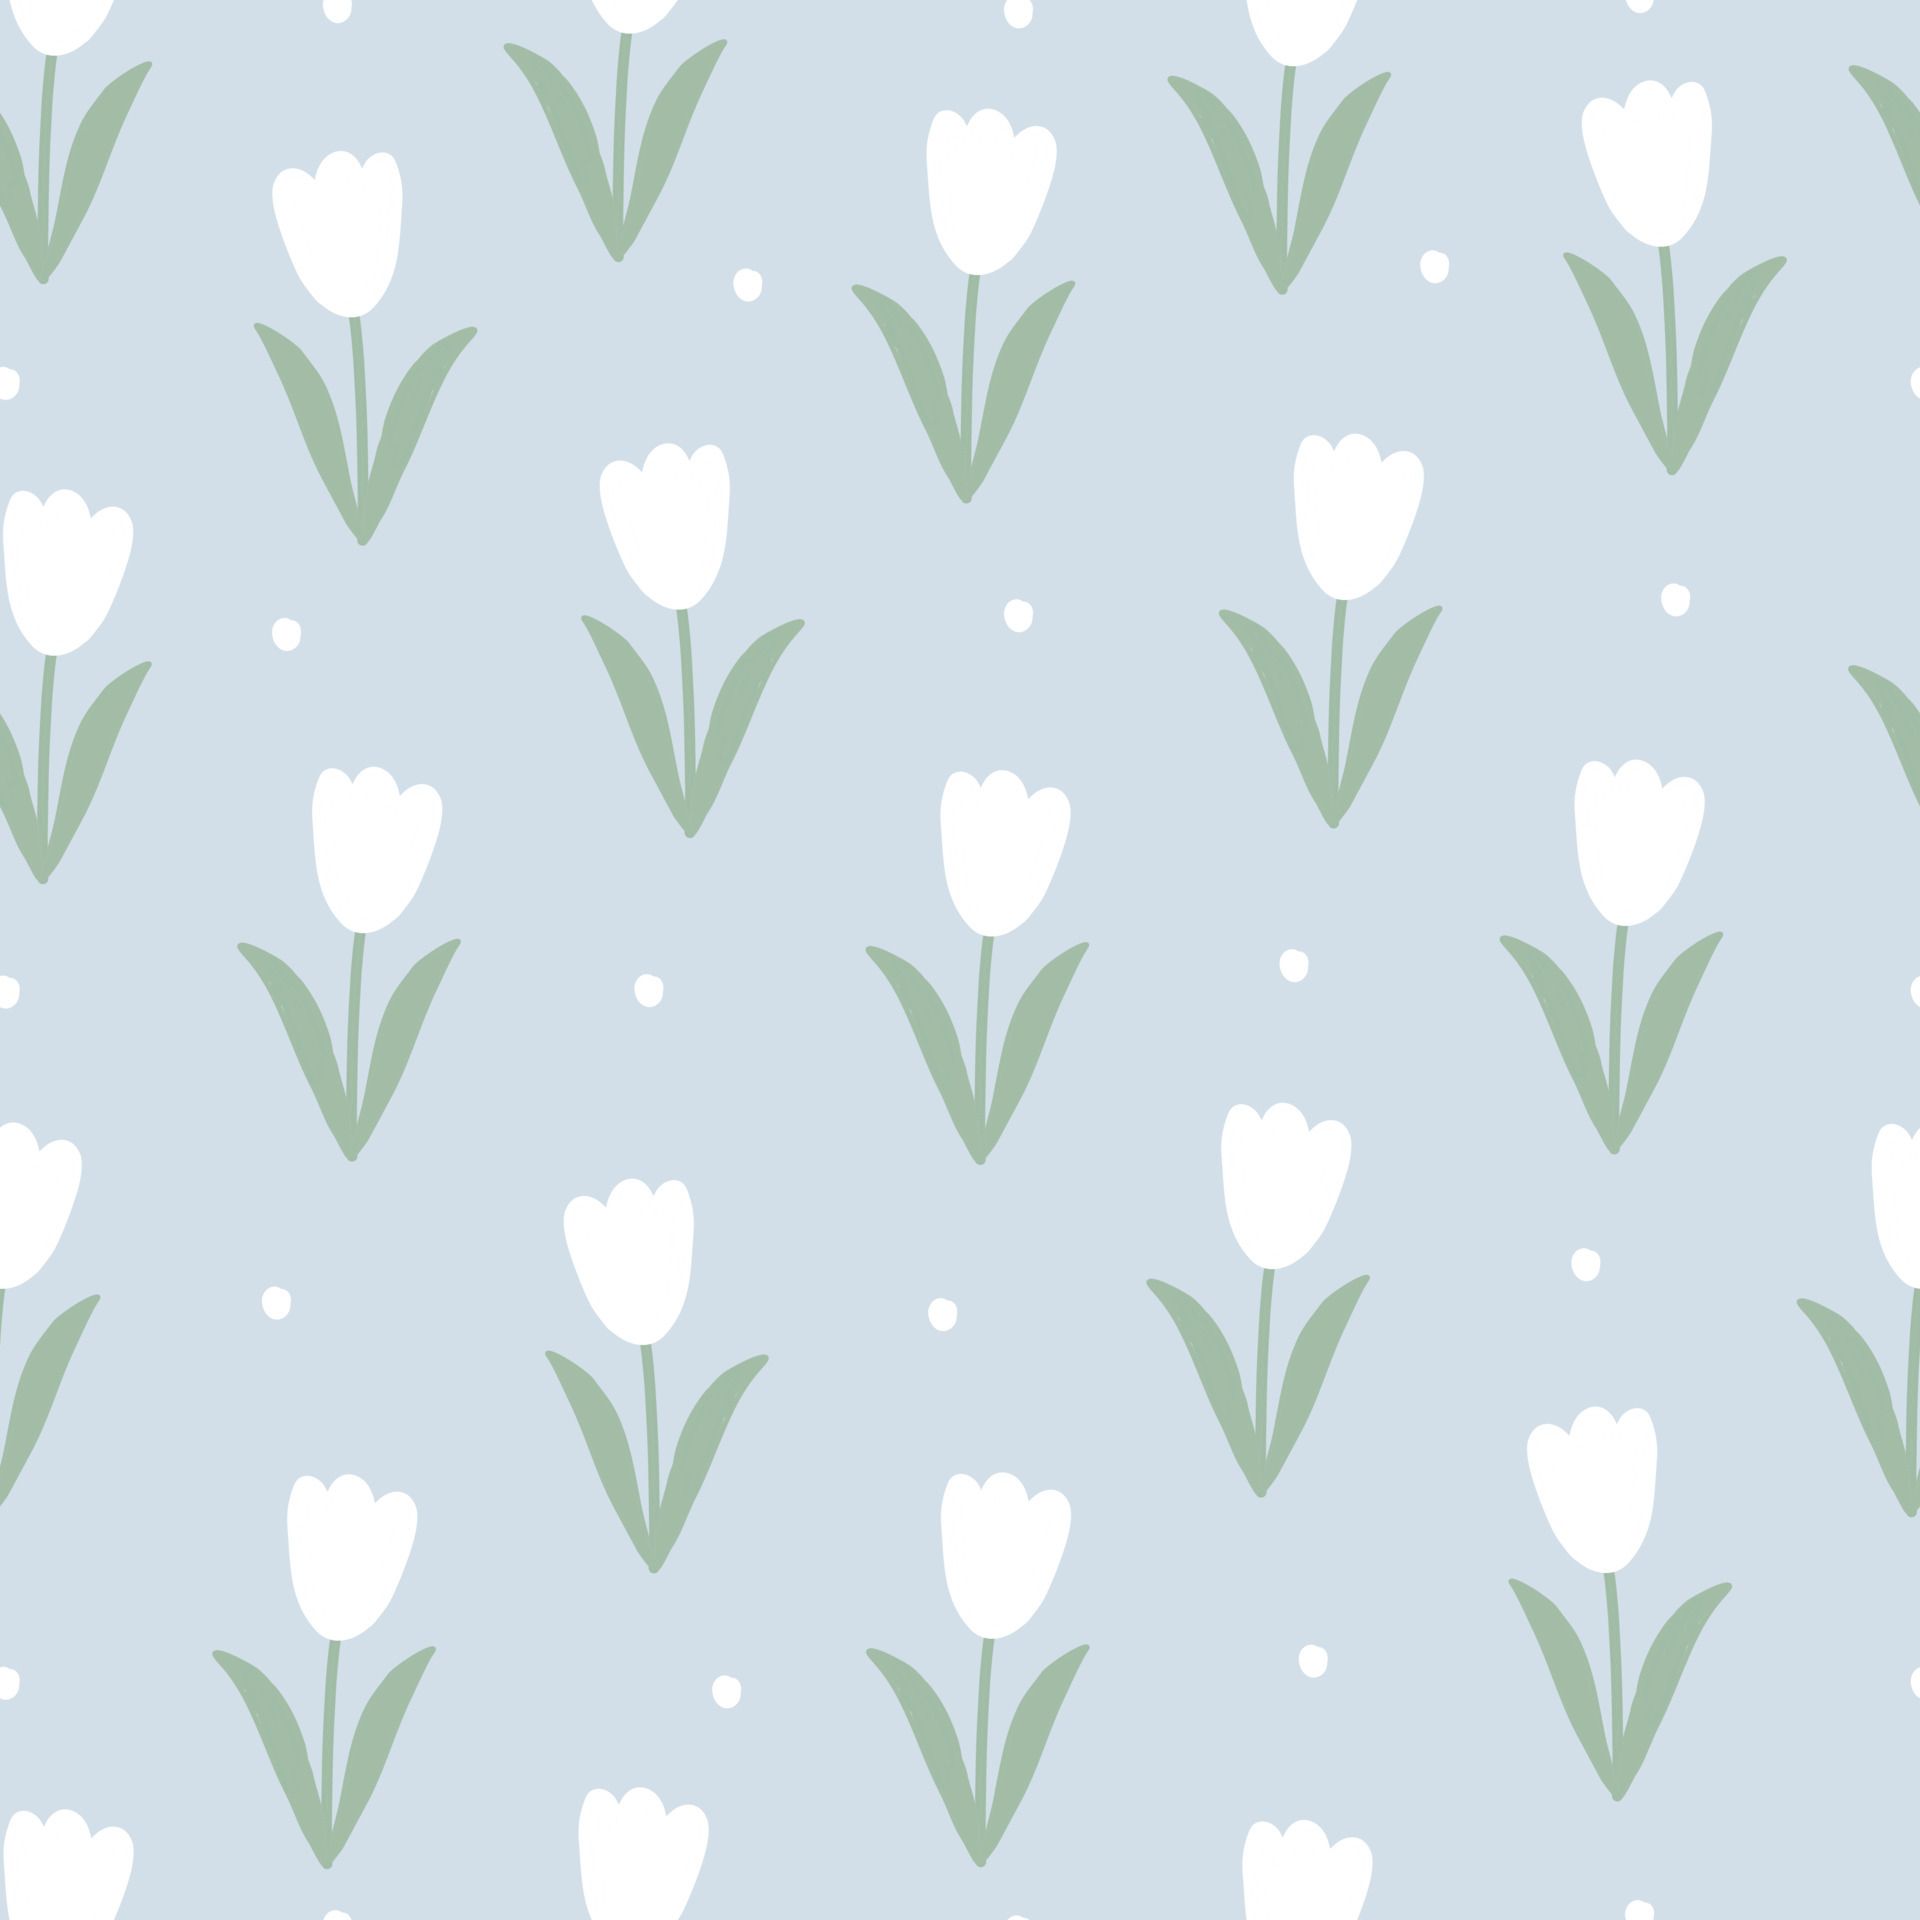 Tulip seamless pattern flower background Used for print, wallpaper, fabric, fashion textiles